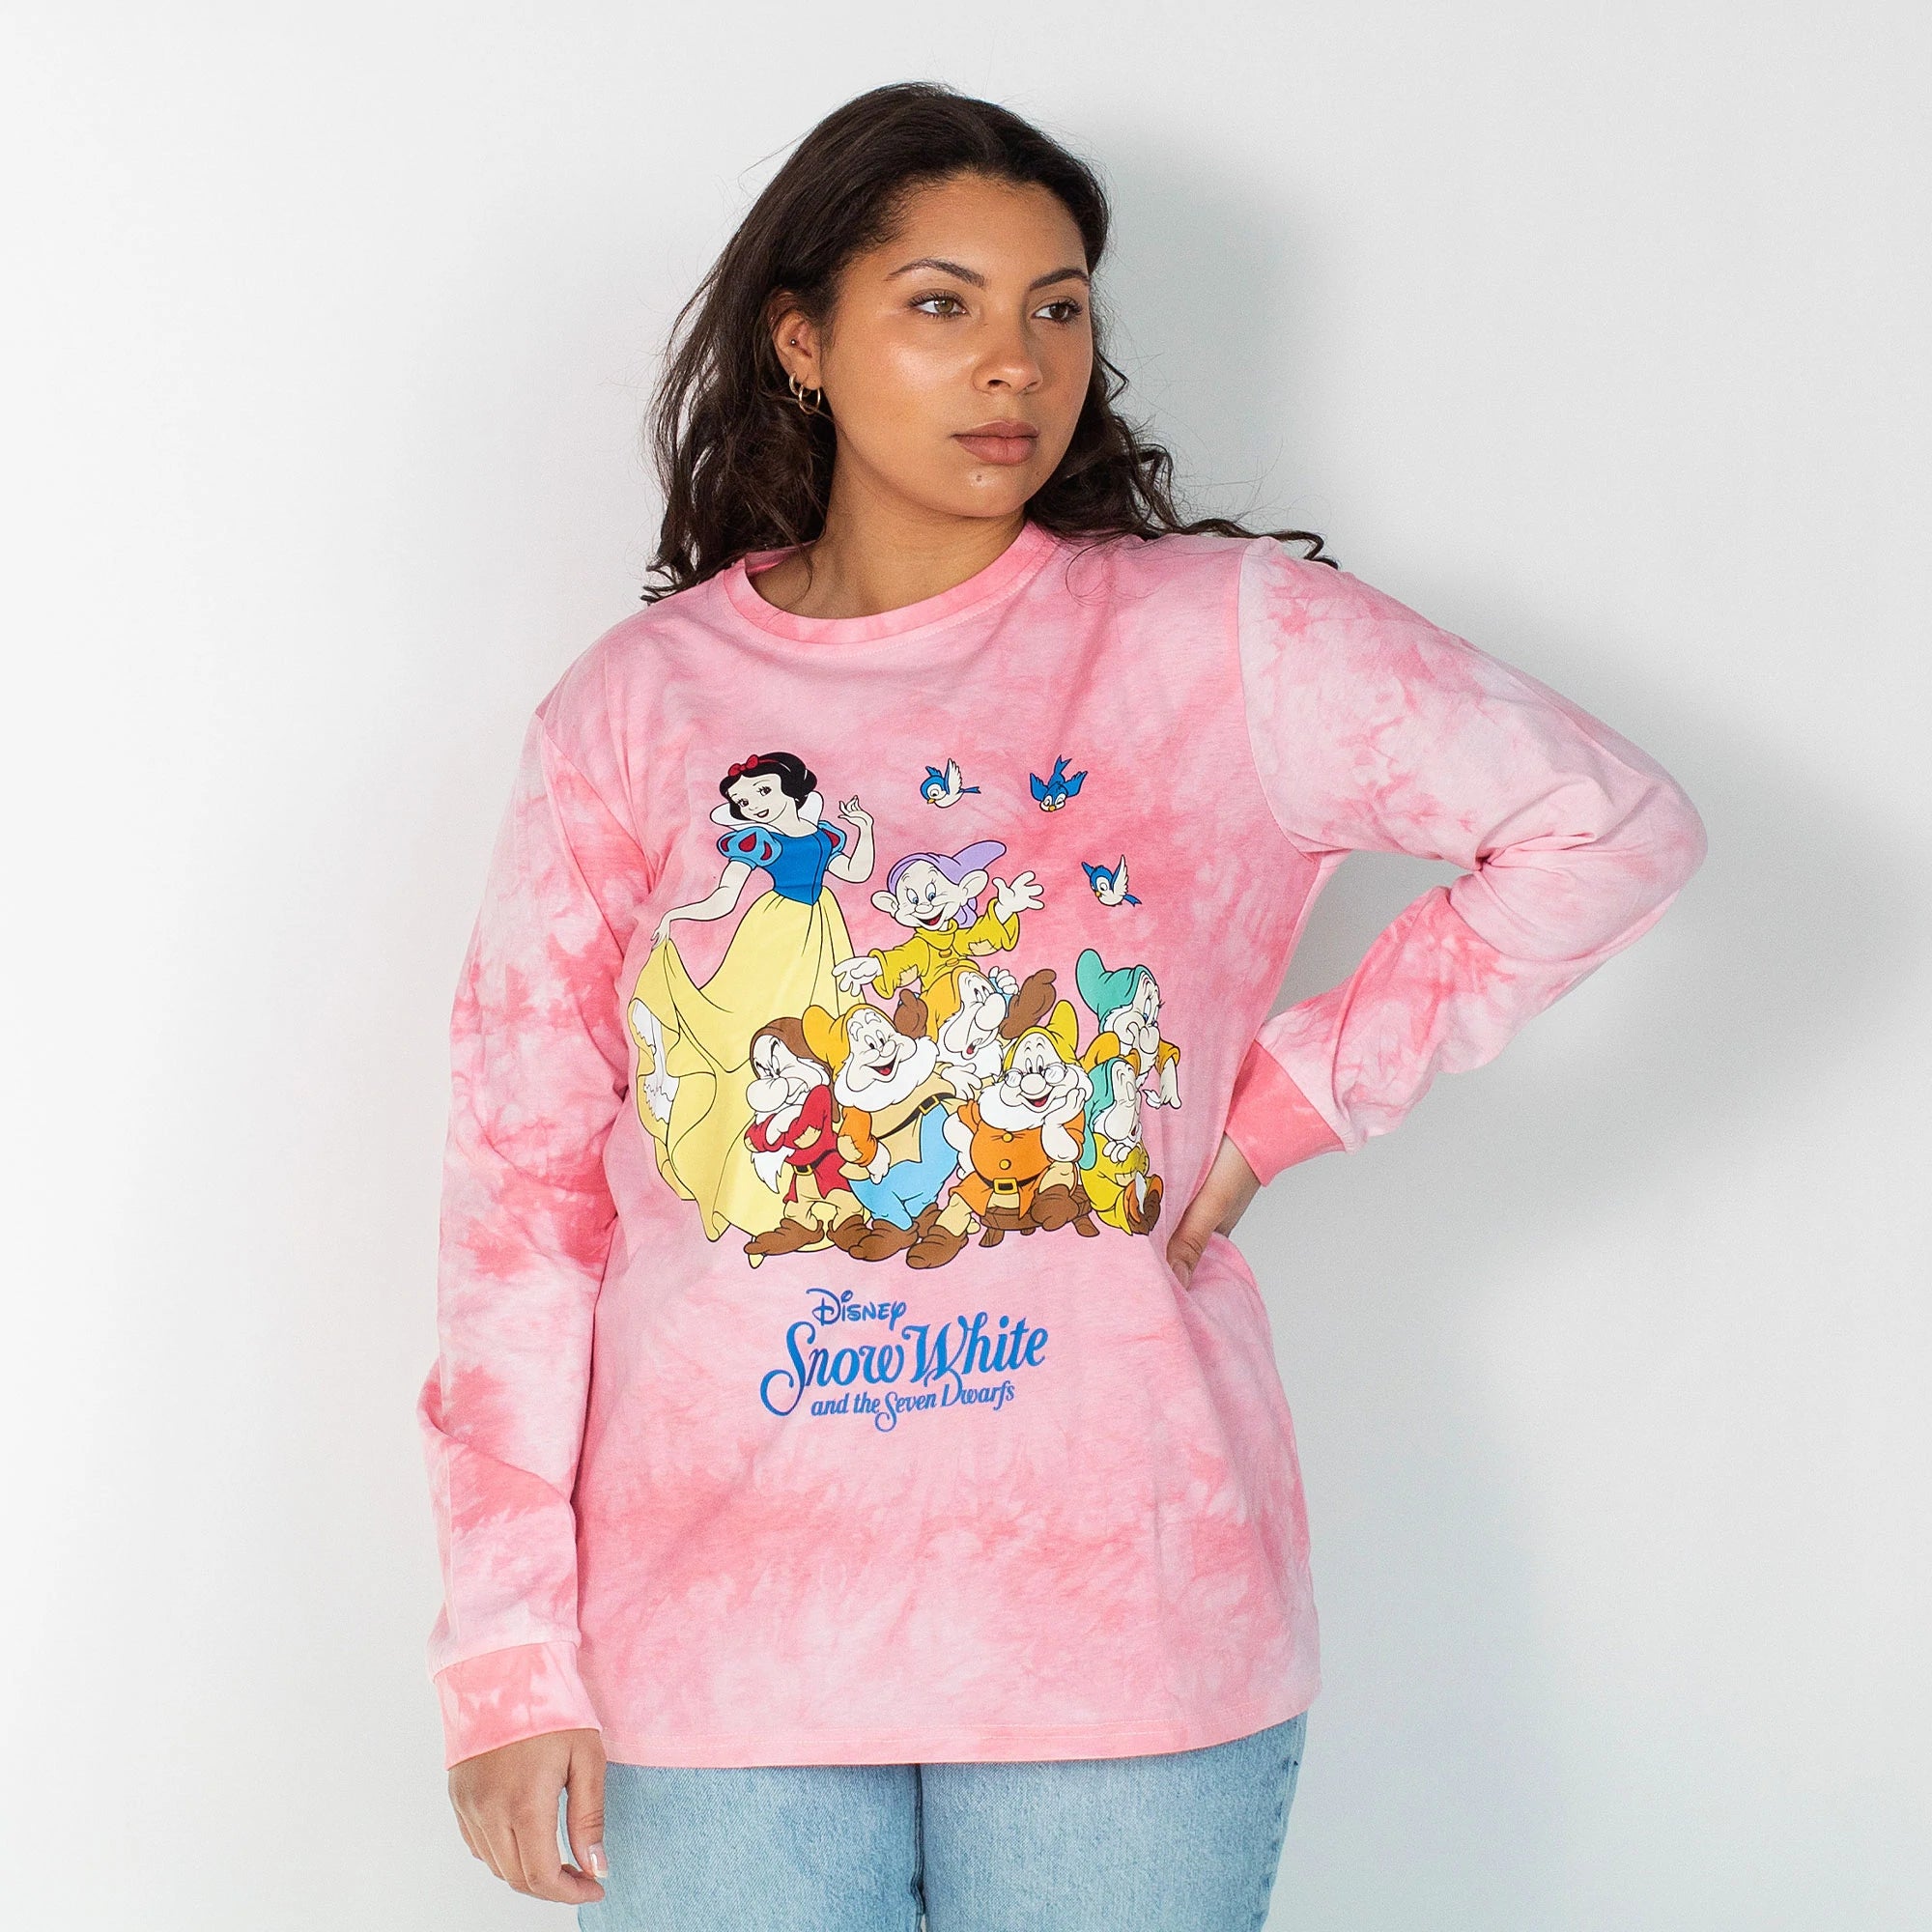 Snow White and the Seven Dwarves Tie Dye Long Sleeve T-Shirt - Cakeworthy